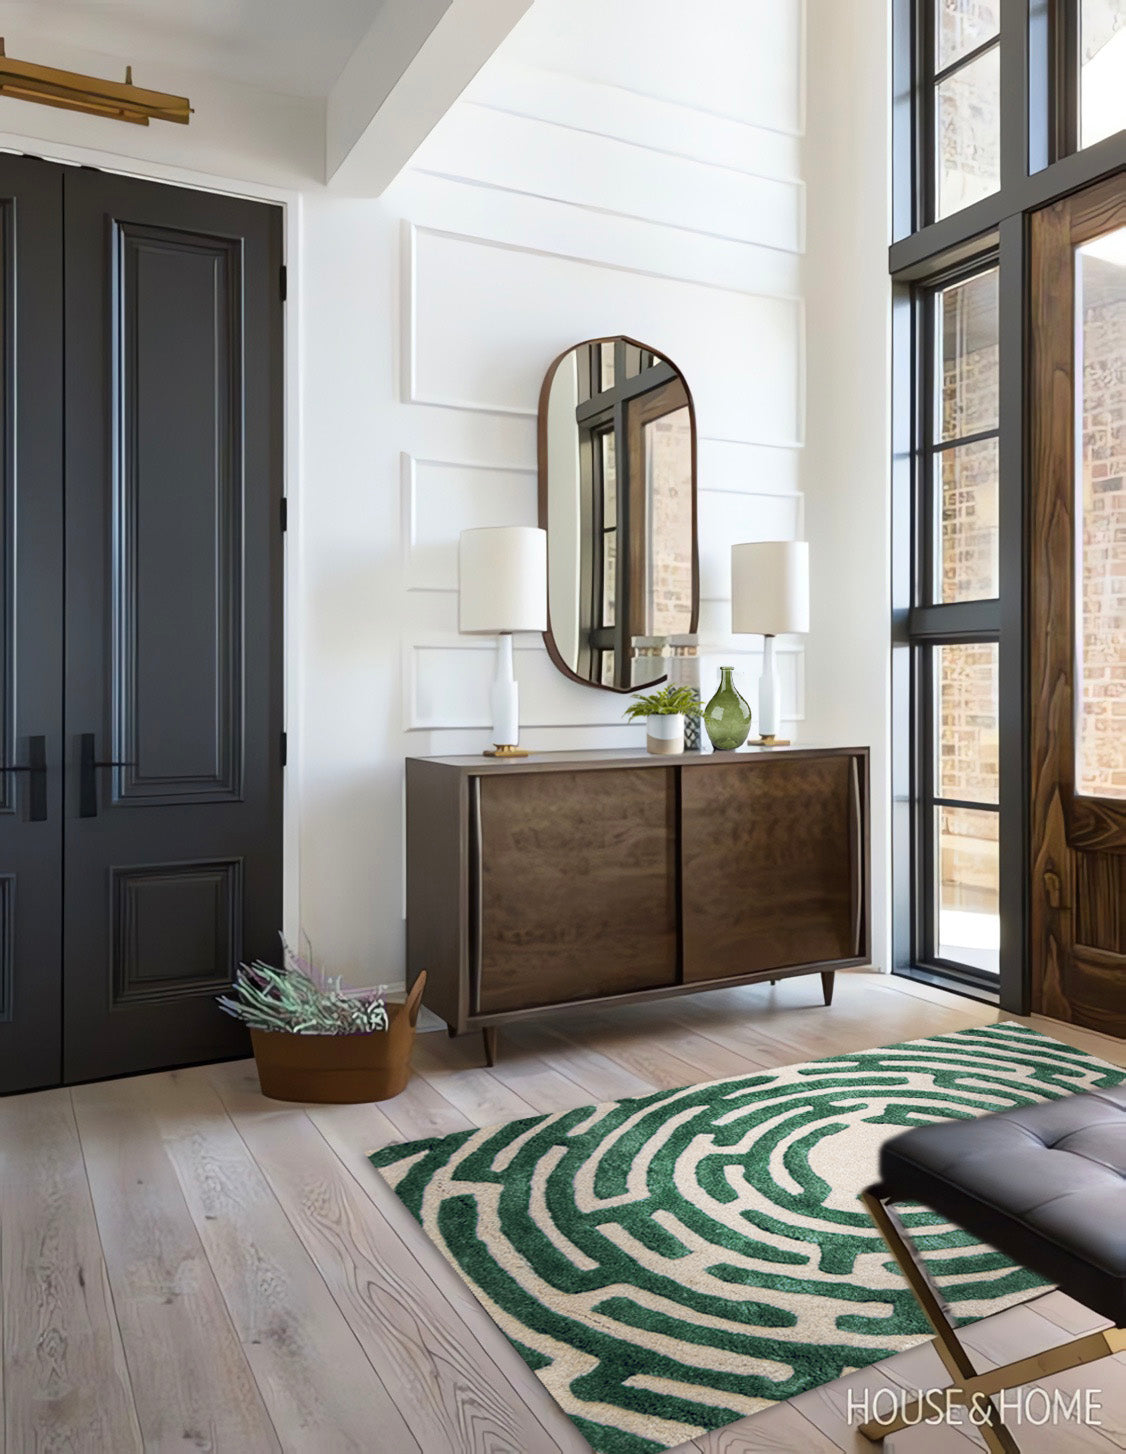 Modern rustic mountain house entry design with green circular maze rug by Kevin Francis, hand-tufted wool luxury area rugs